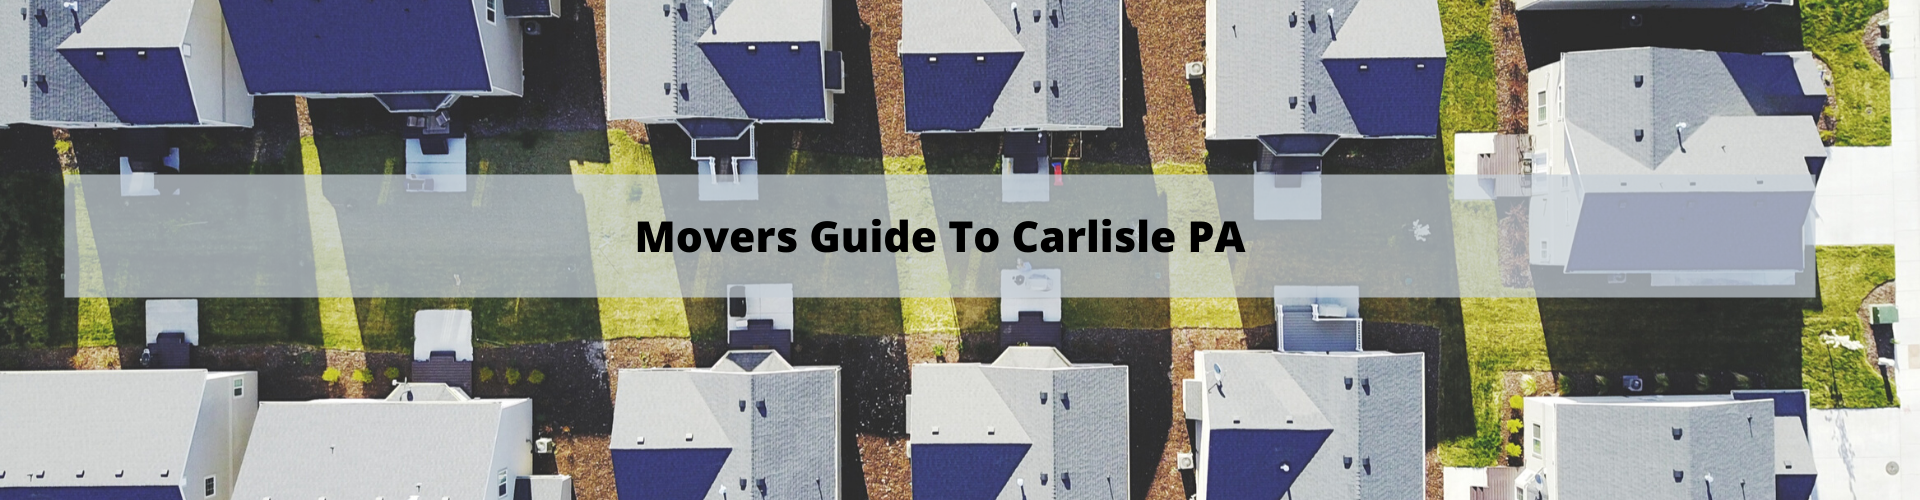 Movers Guide To Carlisle PA